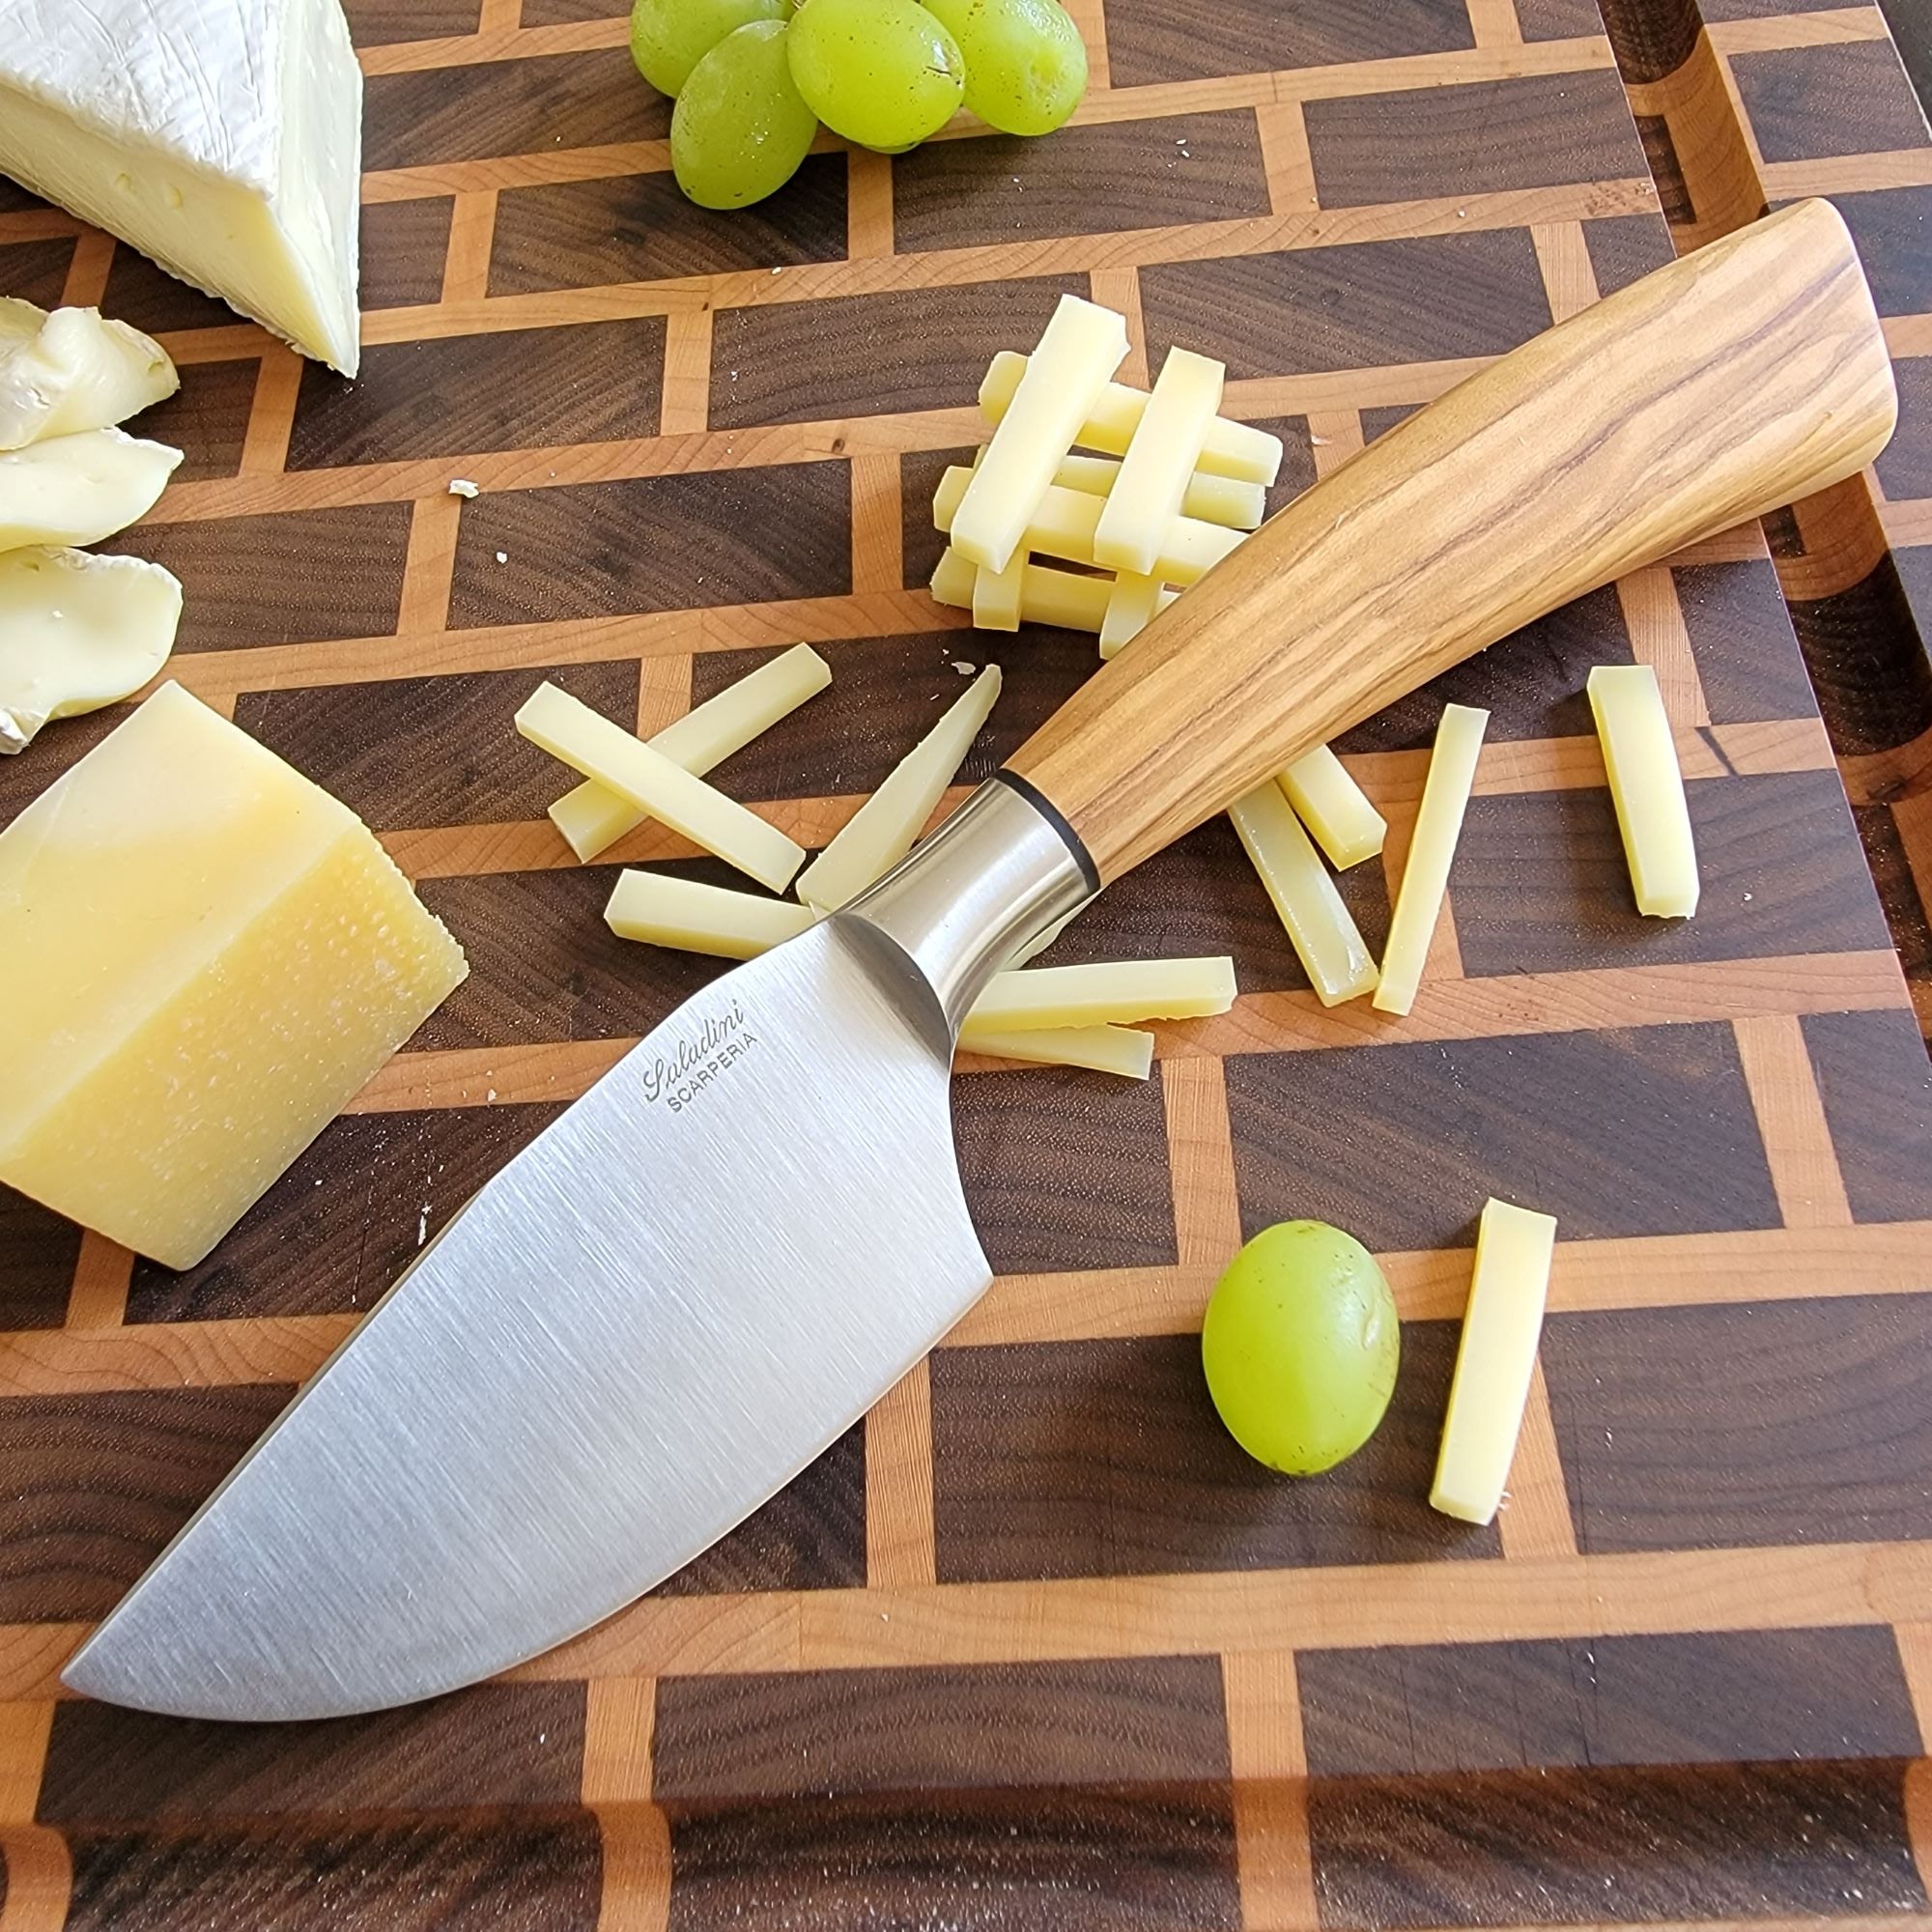 Set of 4 large cheese knives